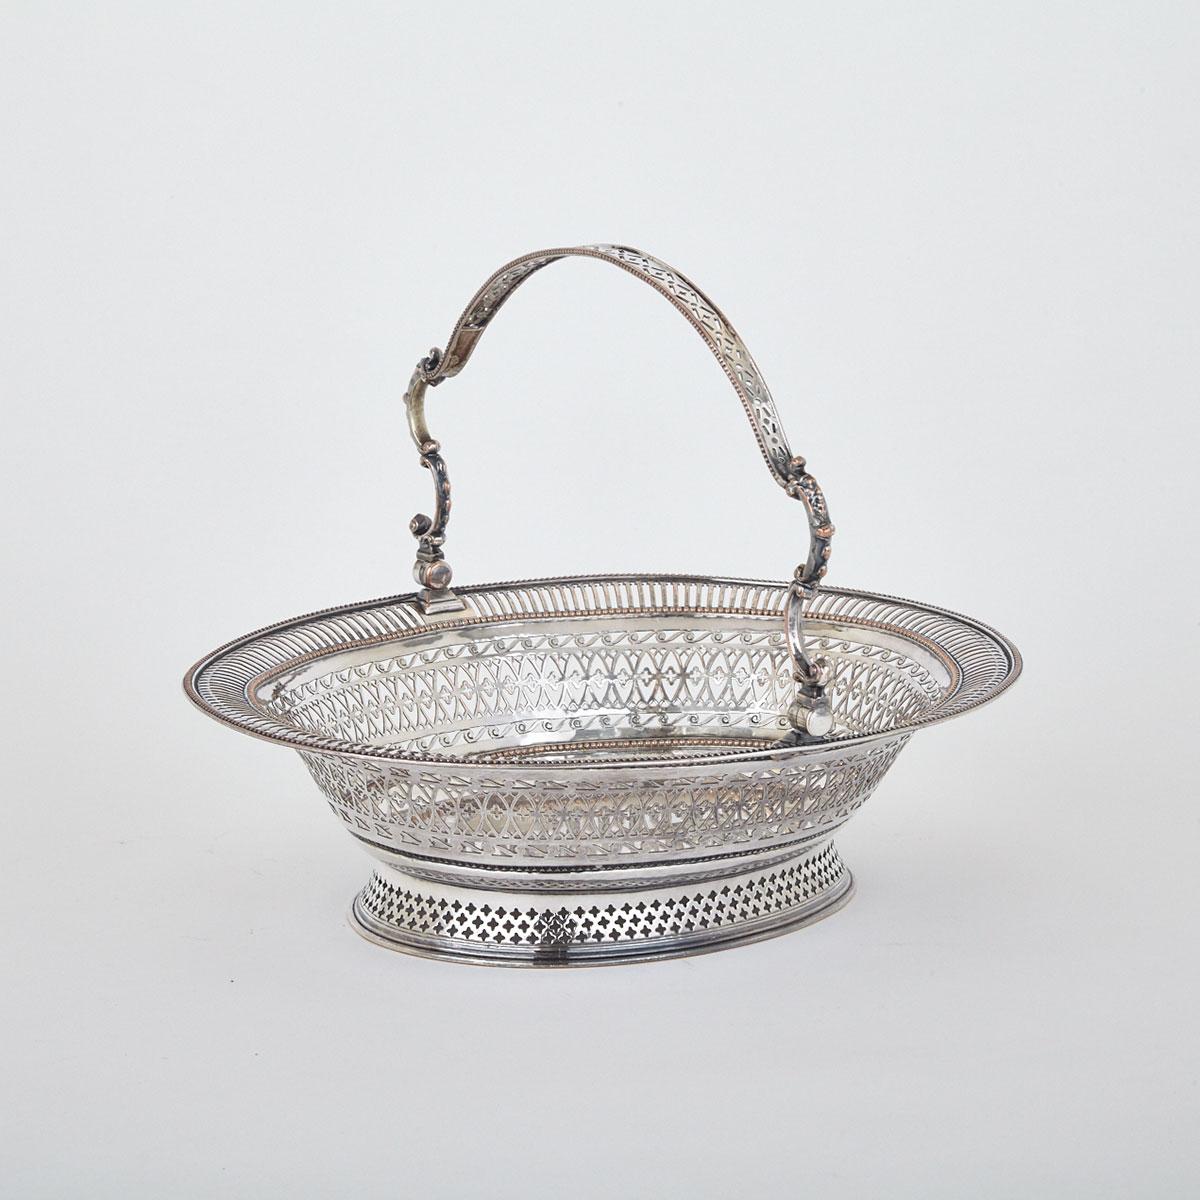 Old Sheffield Plate Oval Cake Basket, late 18th century